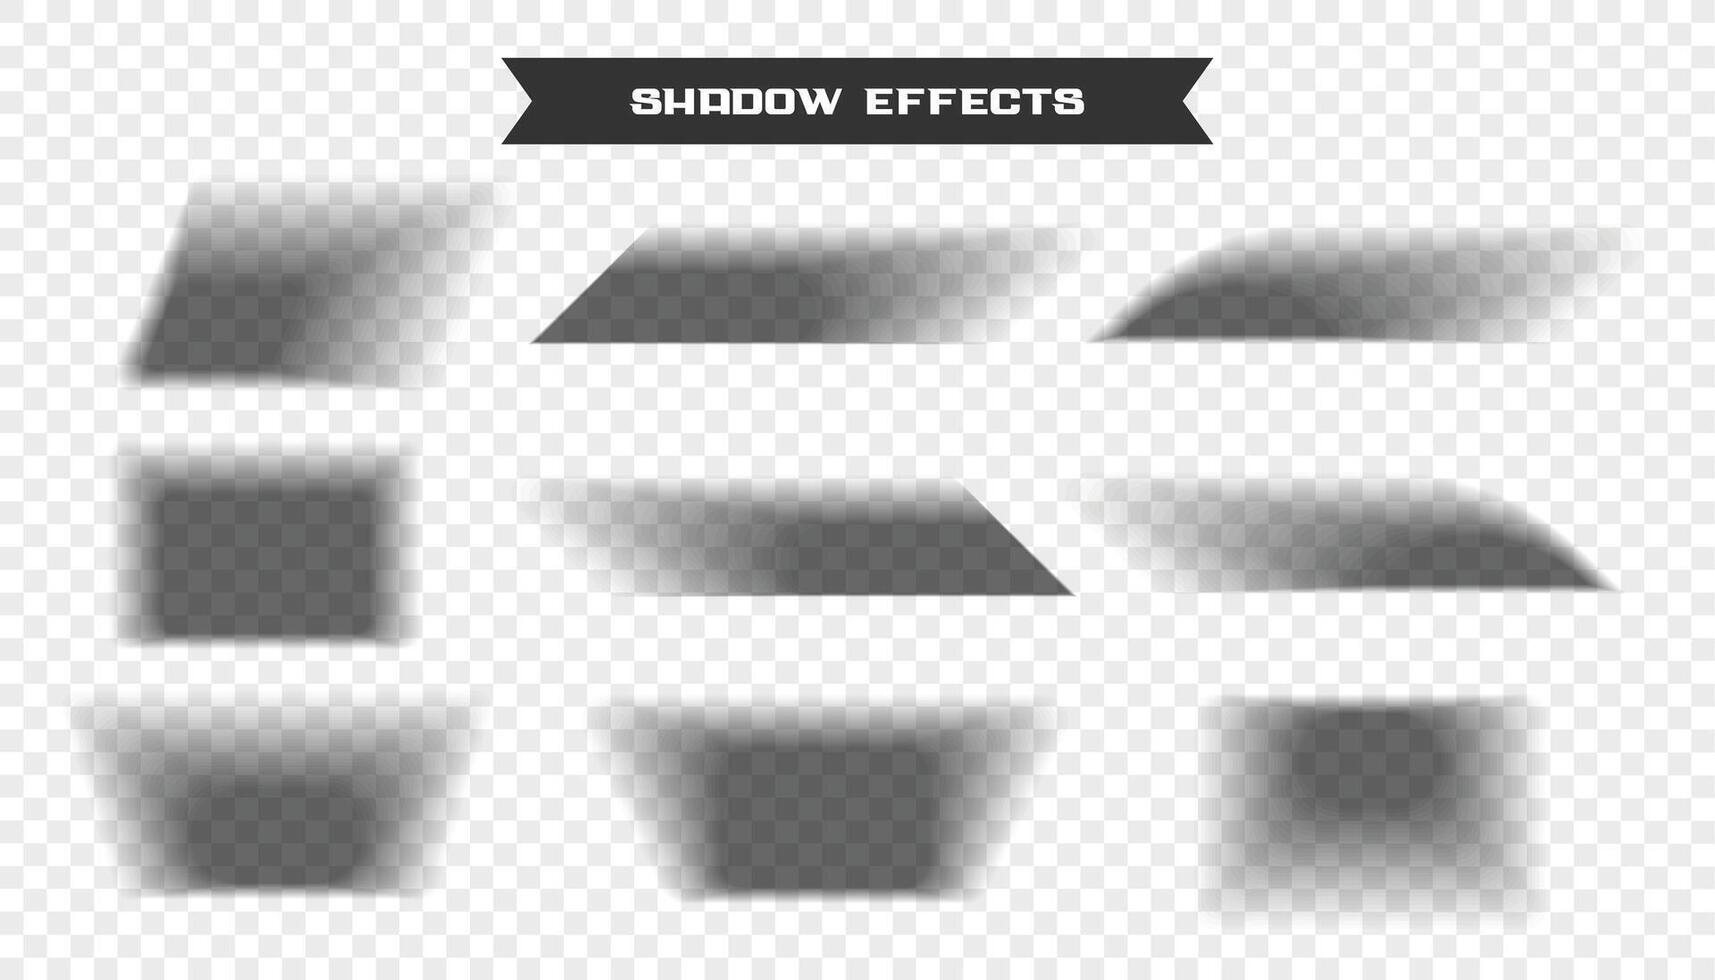 3d style geometric shape shadow effect in checkered background vector